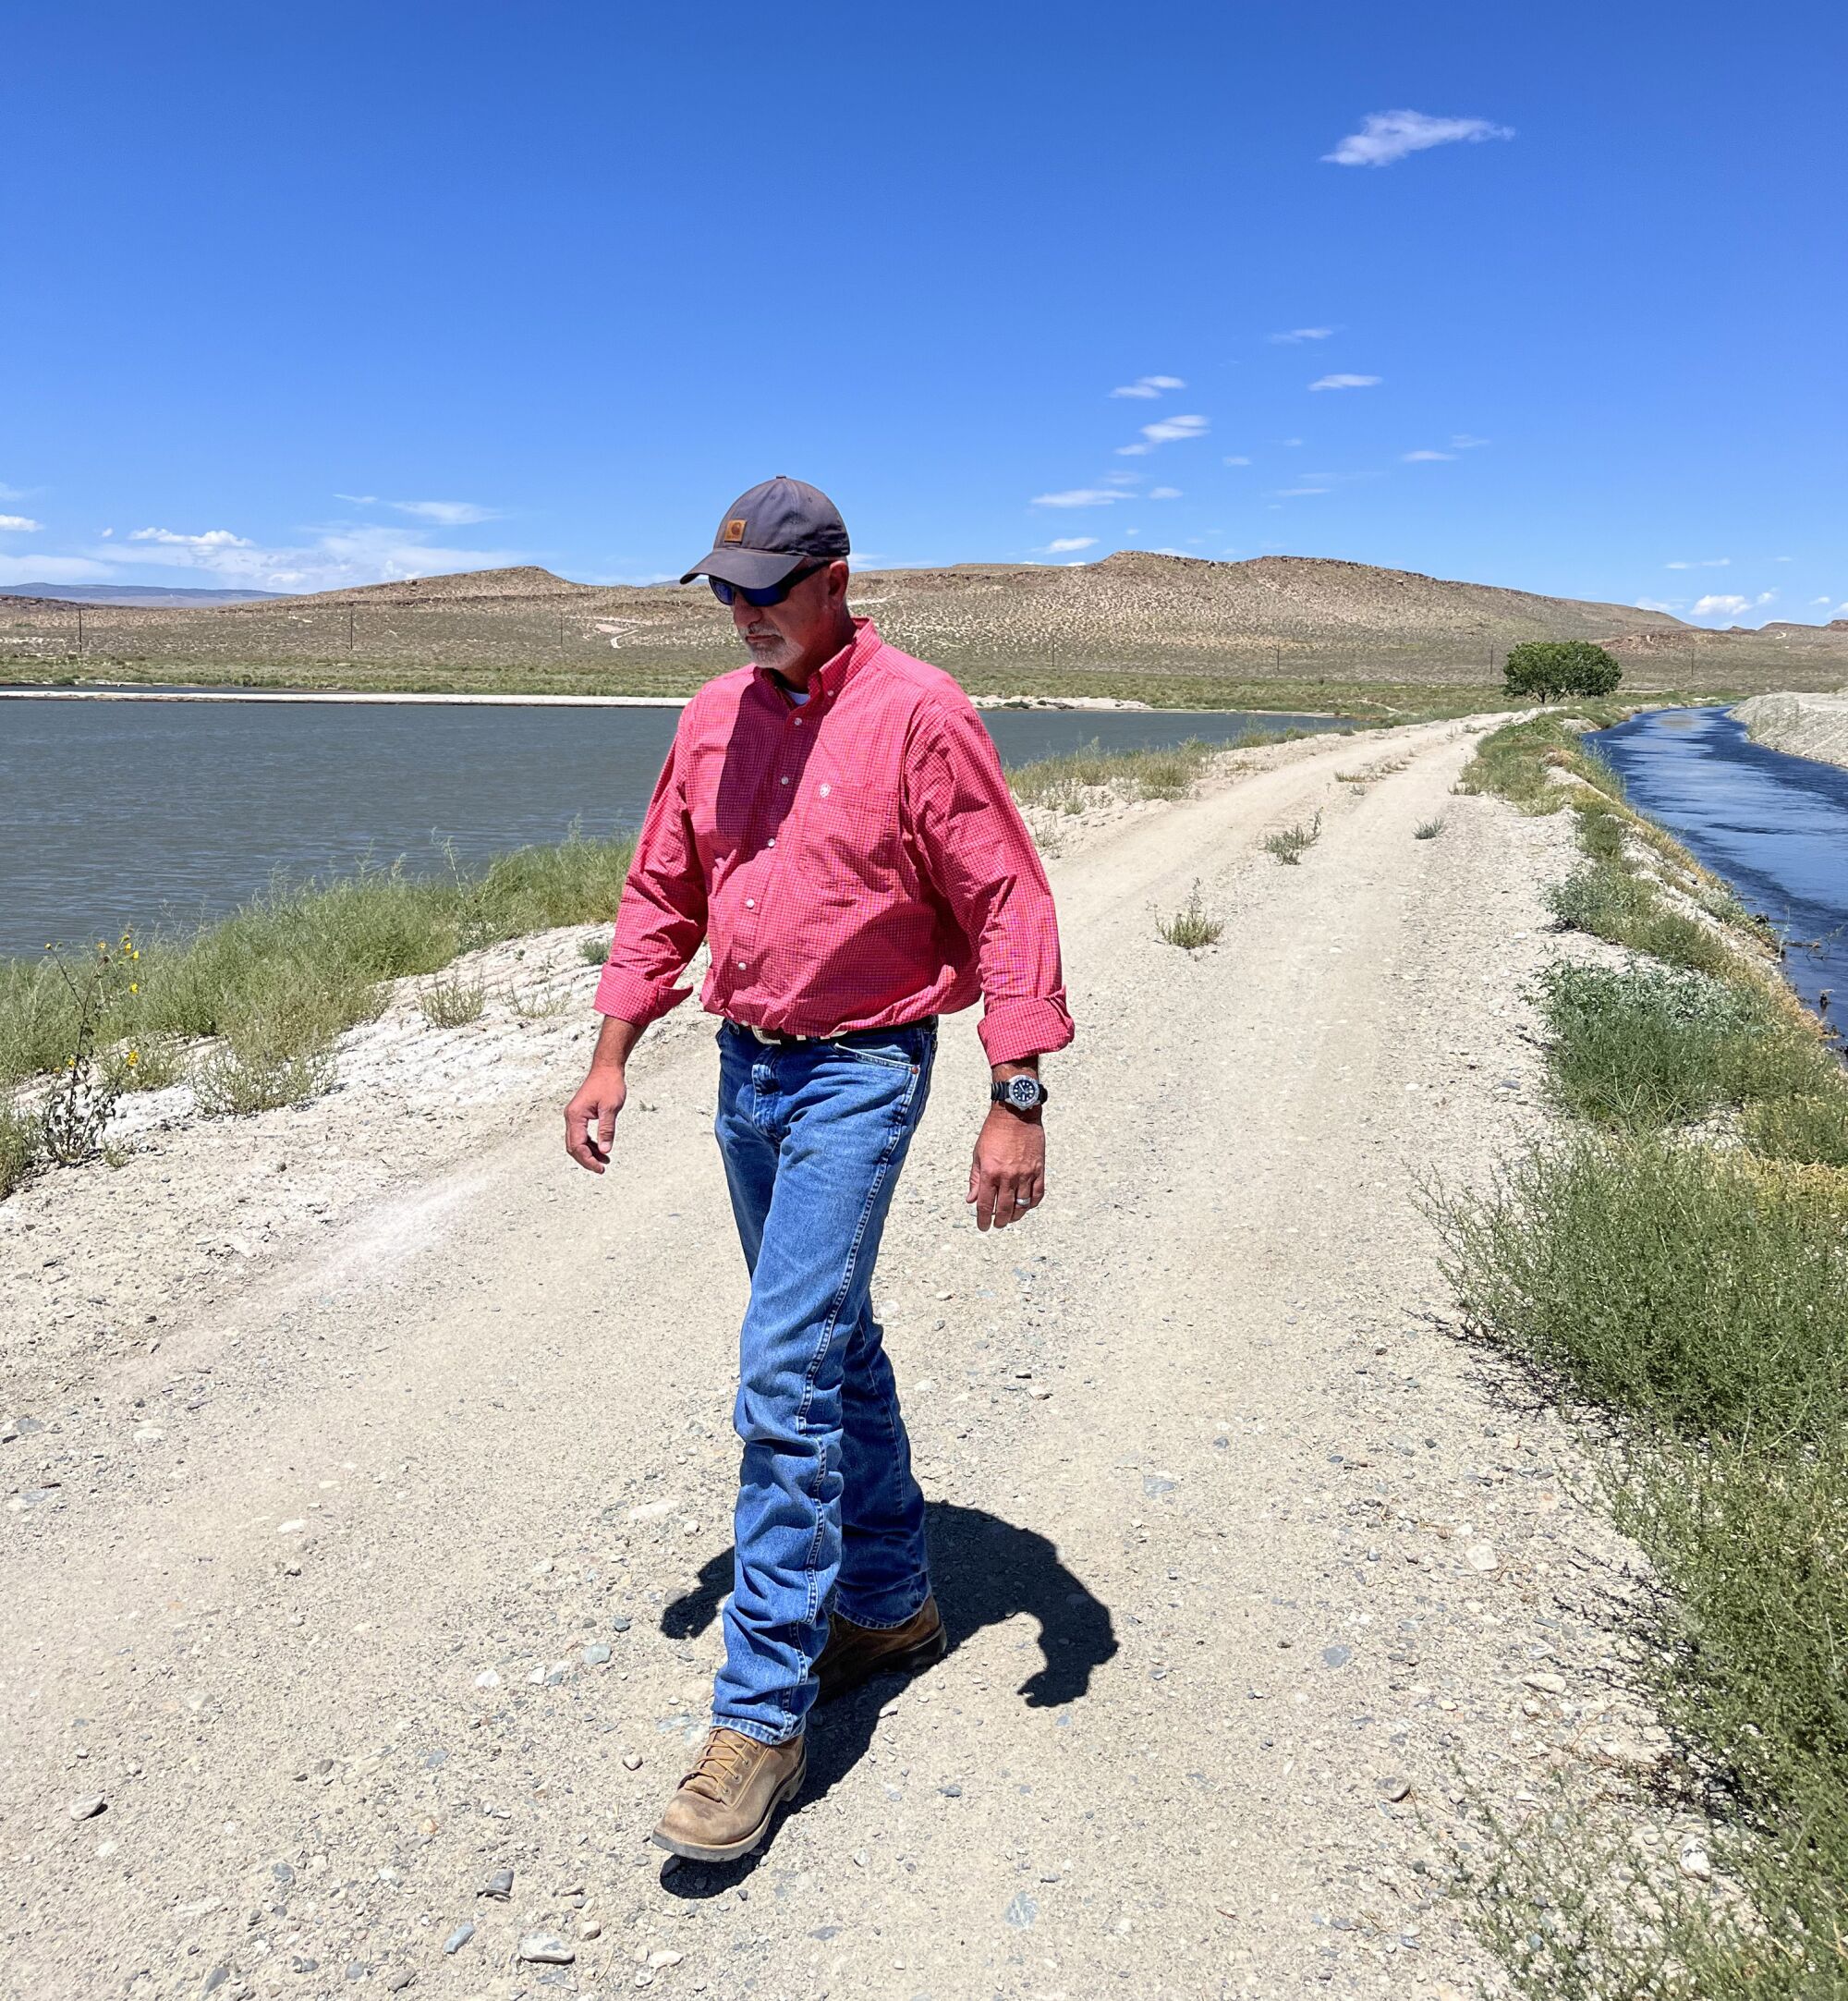 A man in a red shirt and blue jeans walks along a dirt road near a catch basin.